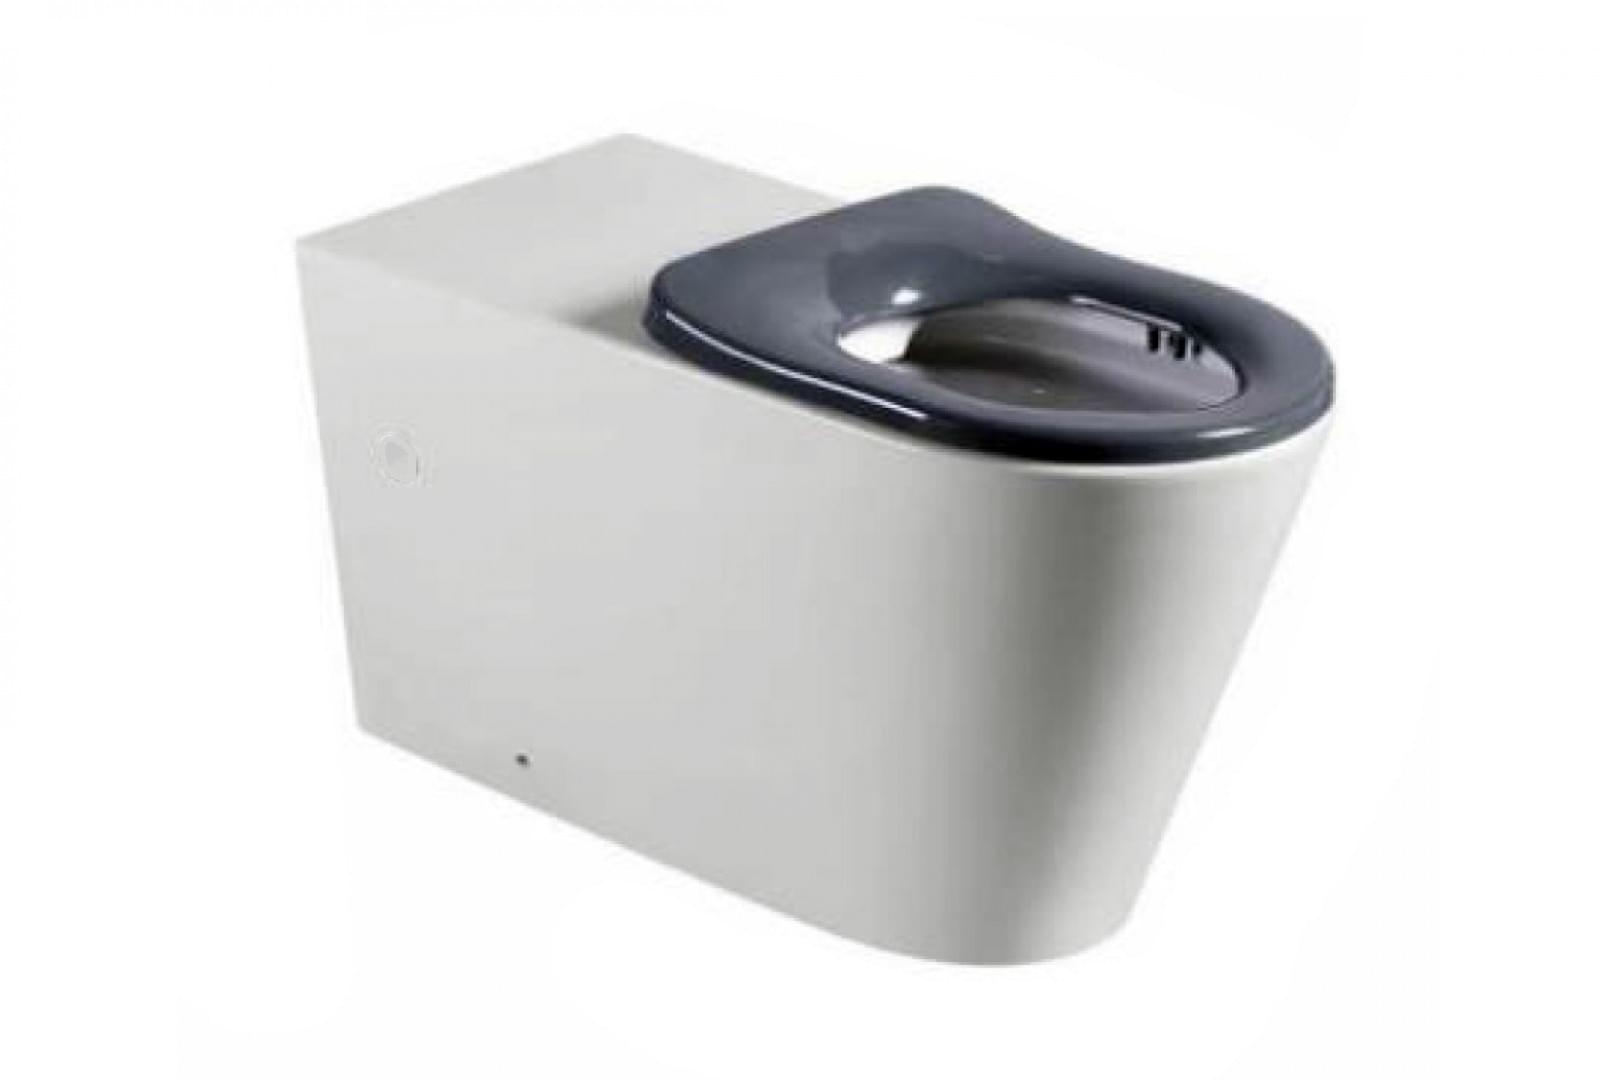 Wellbeing 800 Floor Mounted Back-to-Wall Toilet Pan - WELLBEING800BTW from Enware